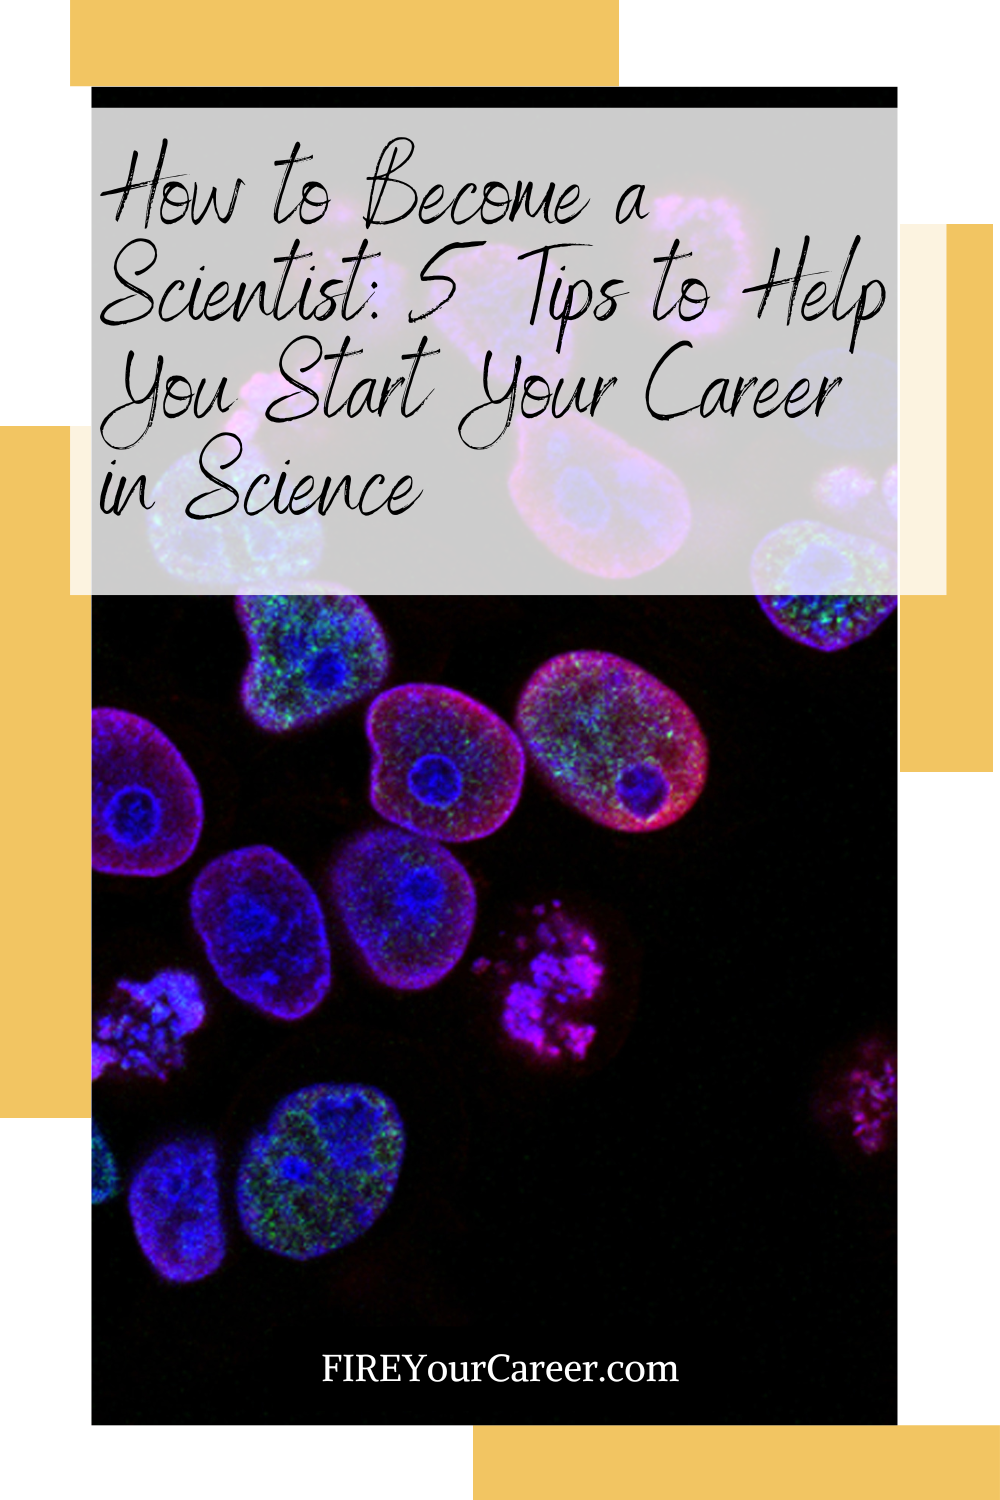 How to Become a Scientist 5 Tips to Help You Start Your Career in Science